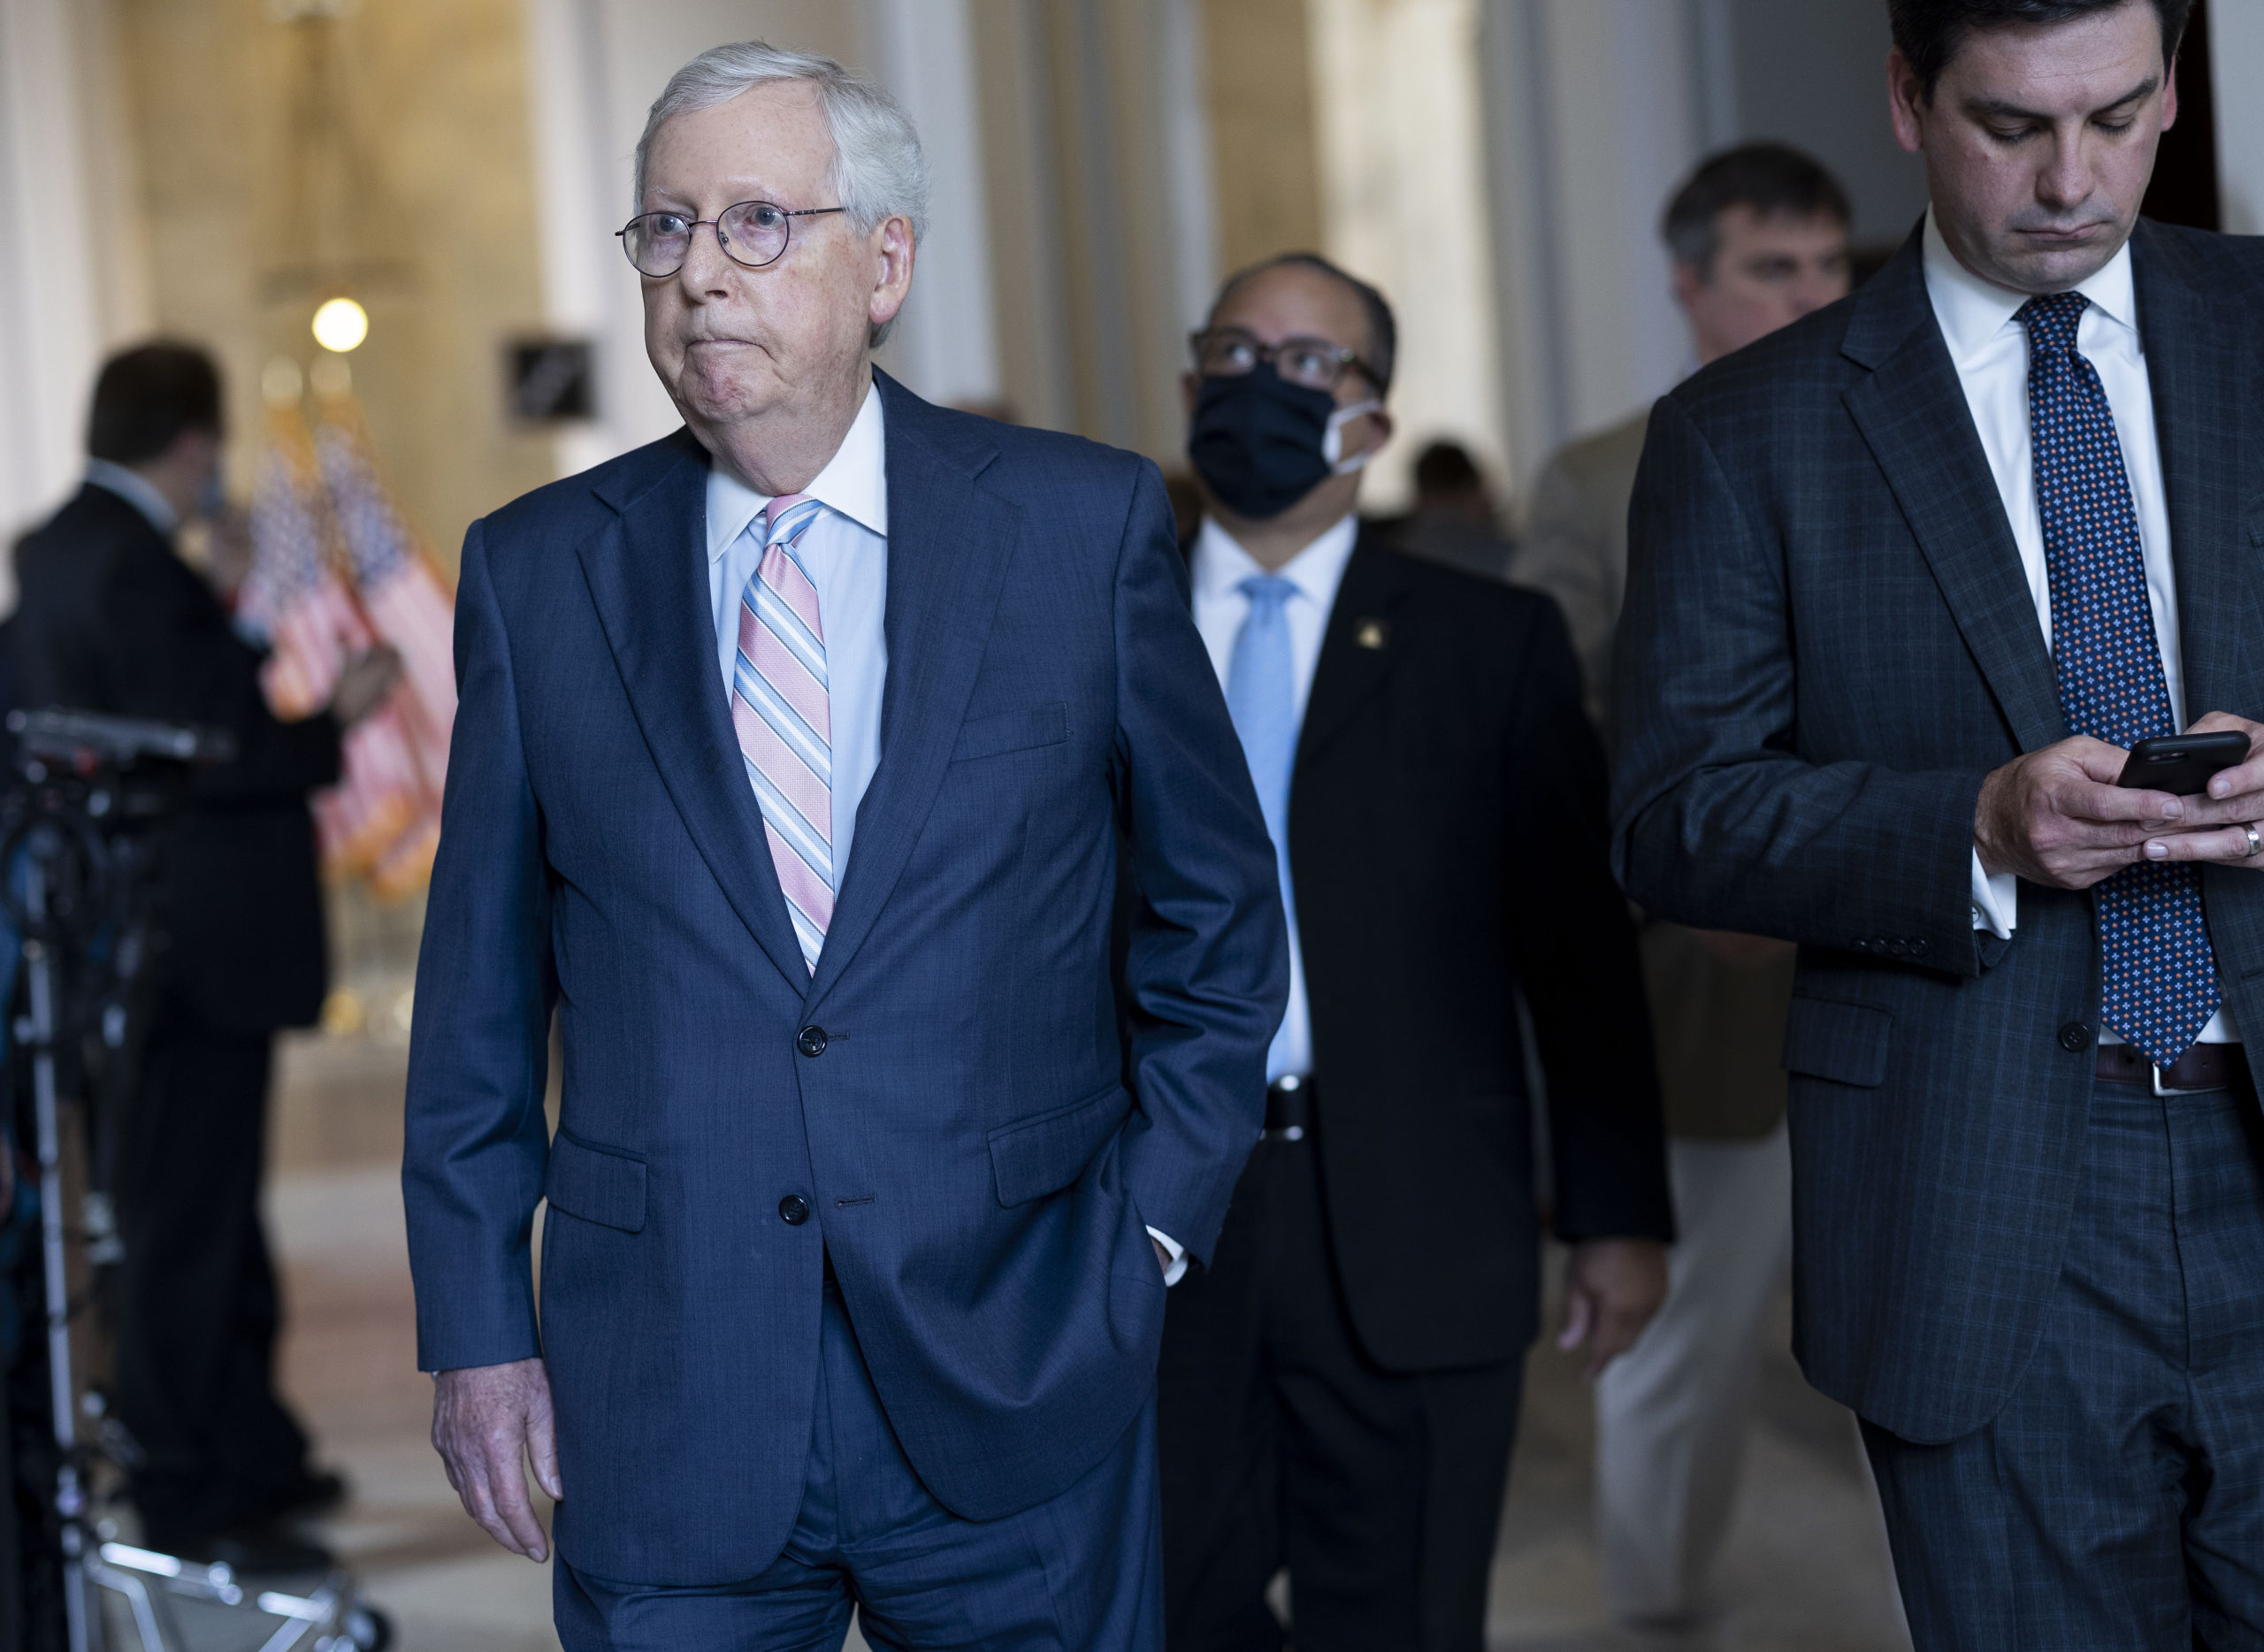 Senate Minority Leader Mitch McConnell on Capitol Hill Tuesday. (Kevin Dietsch/Getty Images)